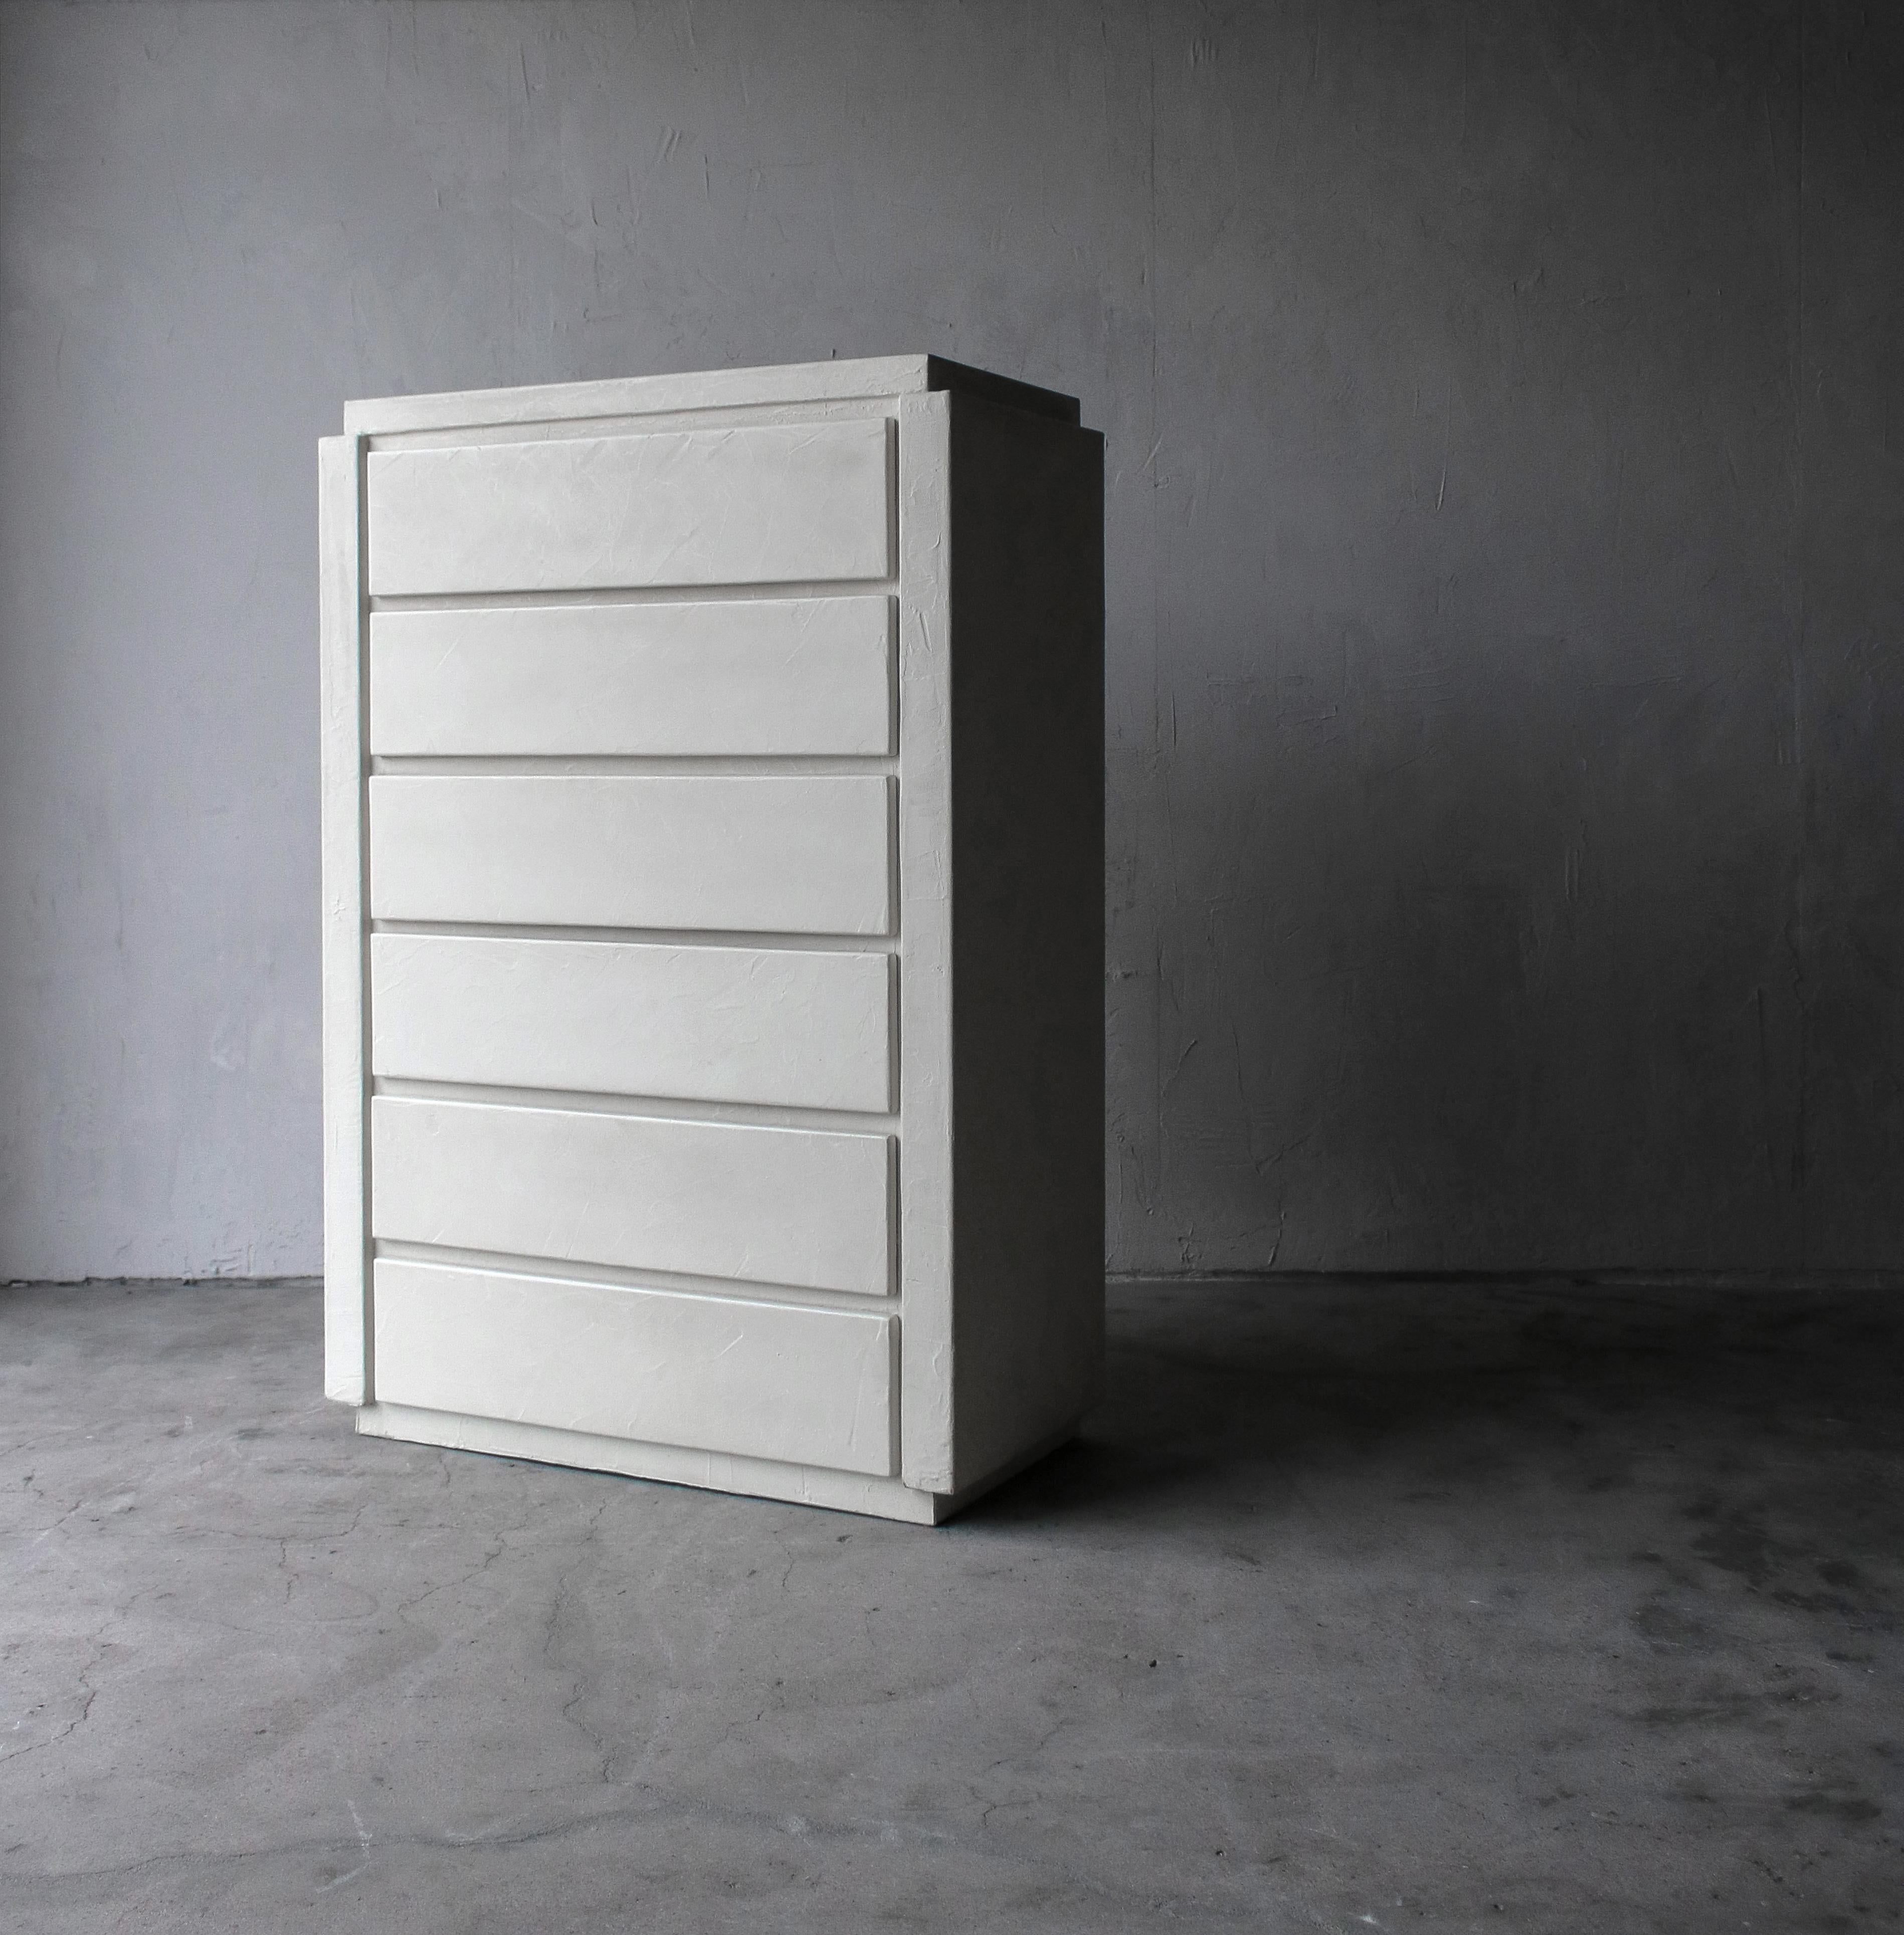 Wonderful Postmodern plaster high boy dresser. Dresser is very large and substantial standing 5ft tall and featuring 6 drawers for all your storage needs.

This set is so beautiful and right on trend with the Minimalist design that has become so